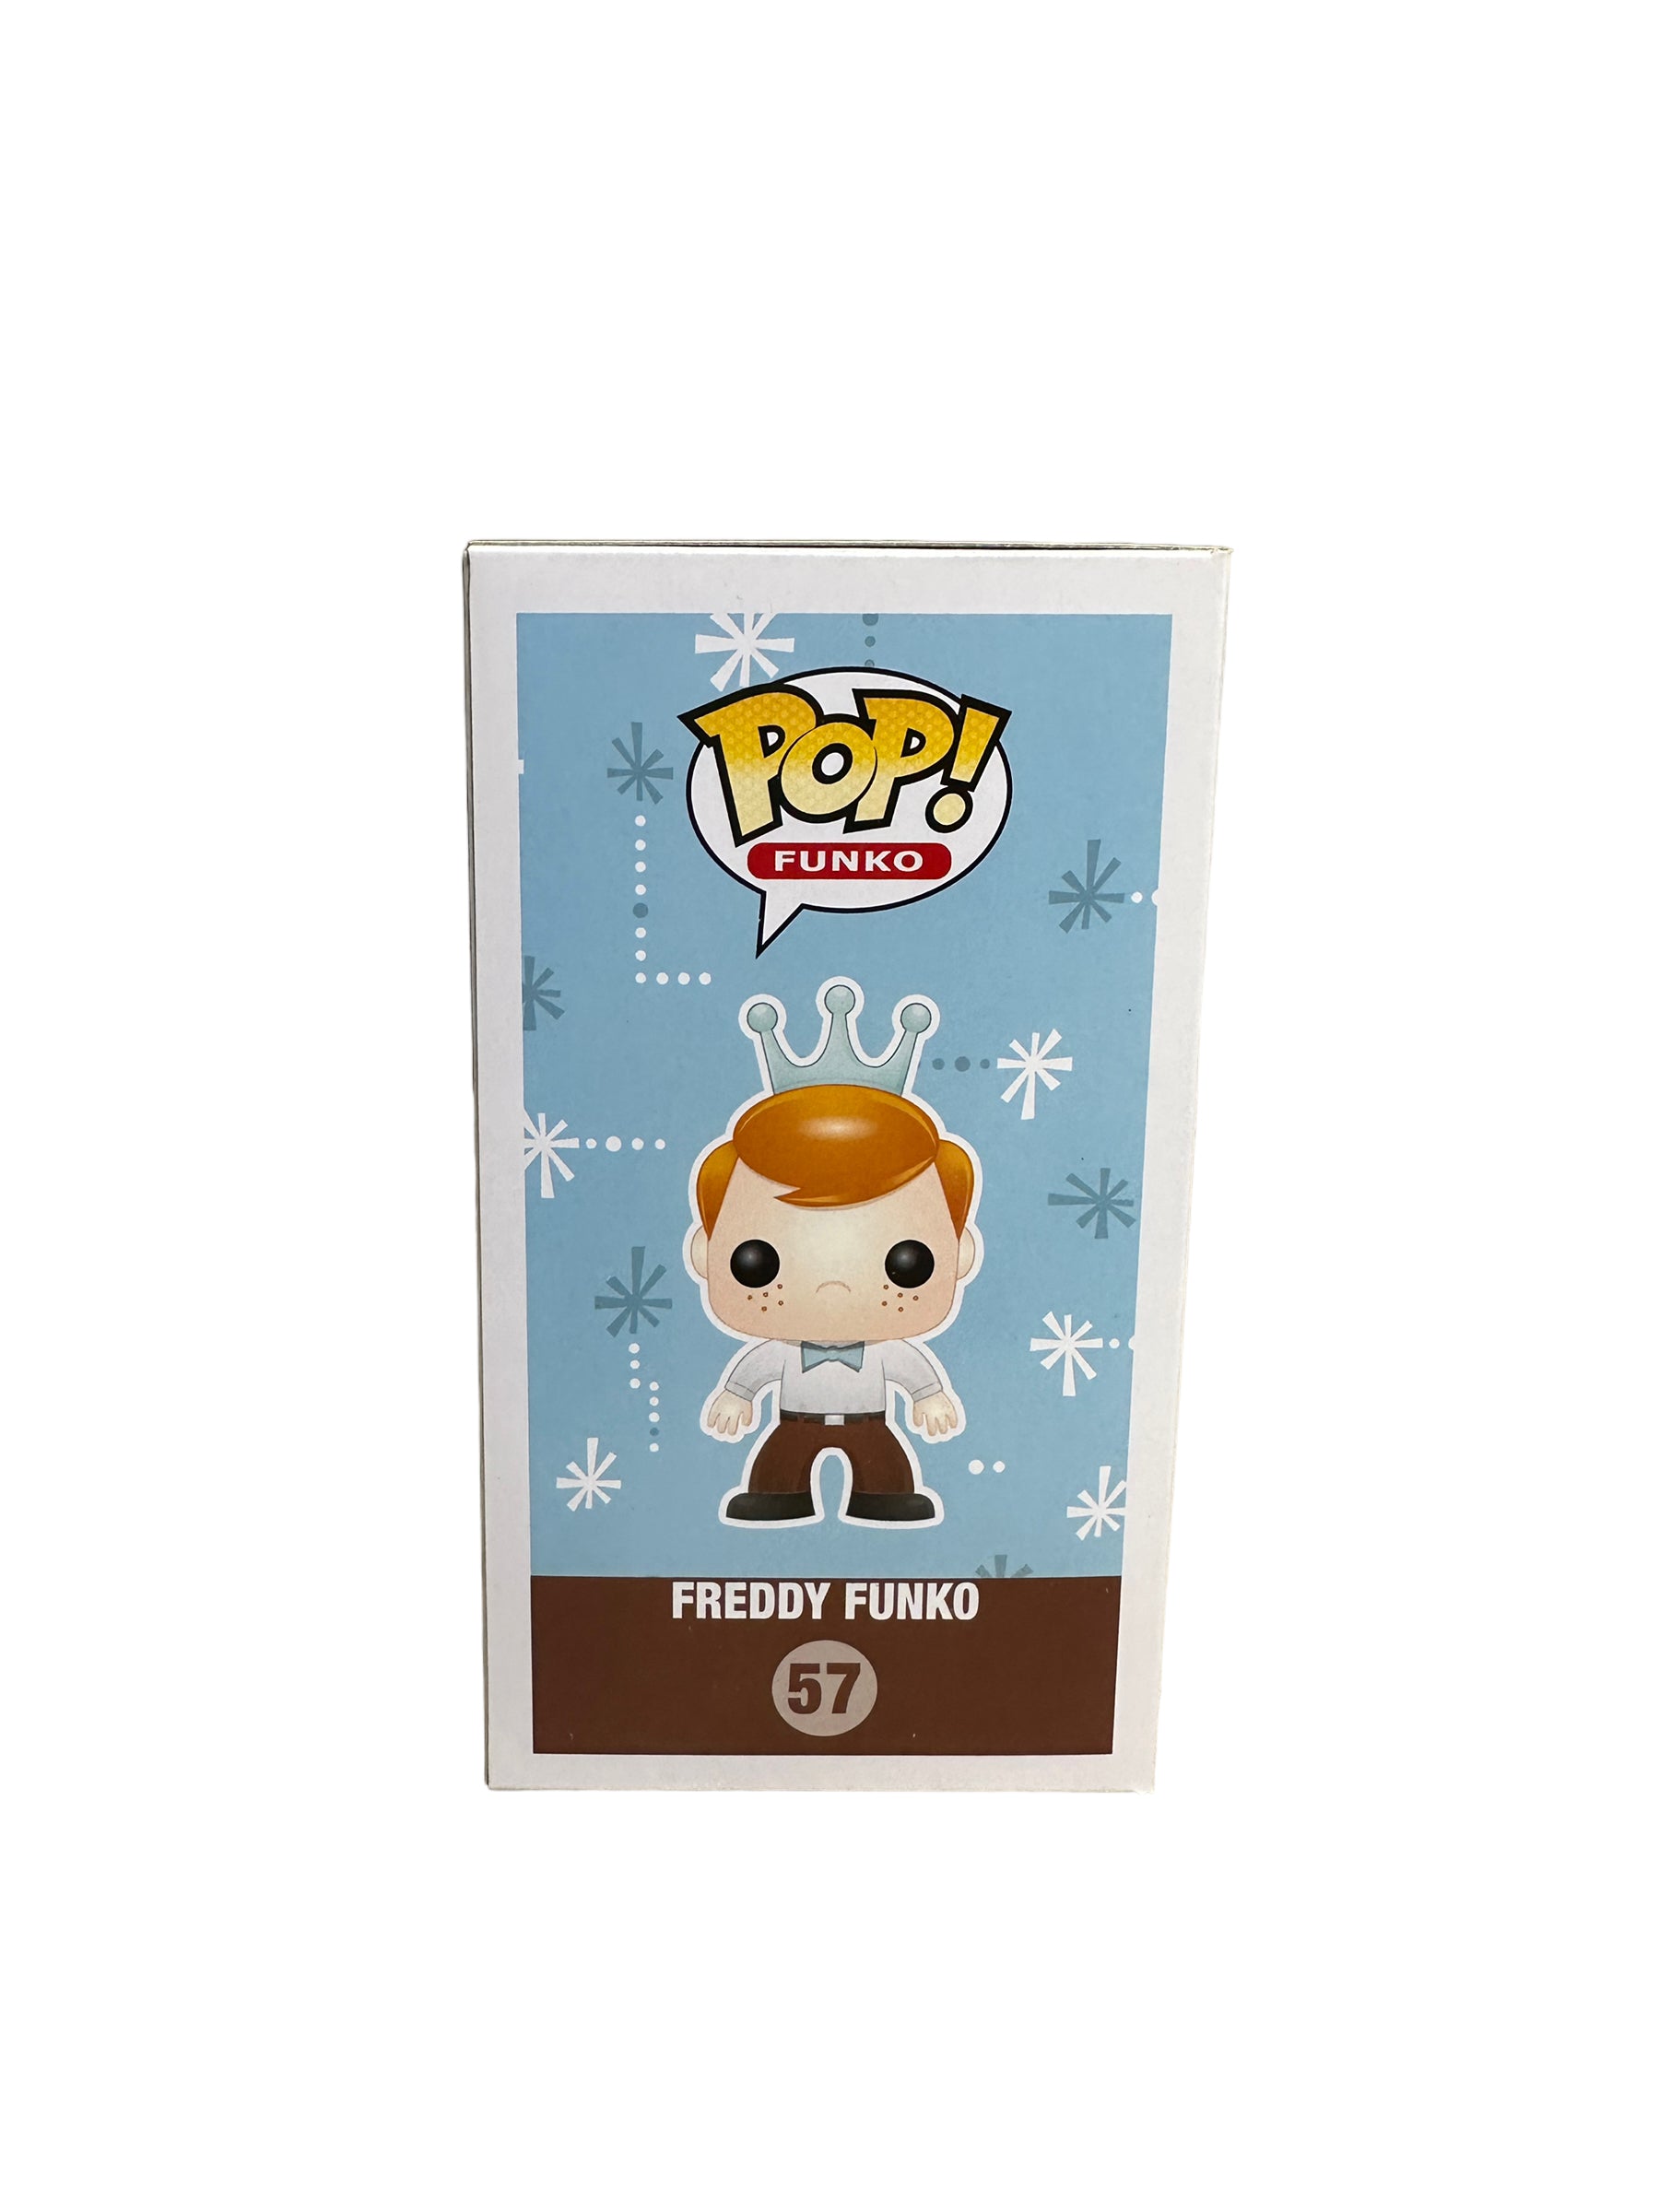 Freddy Funko as Charlie Brown #57 Funko Pop! - SDCC 2016 Exclusive LE500 Pcs - Condition 9/10